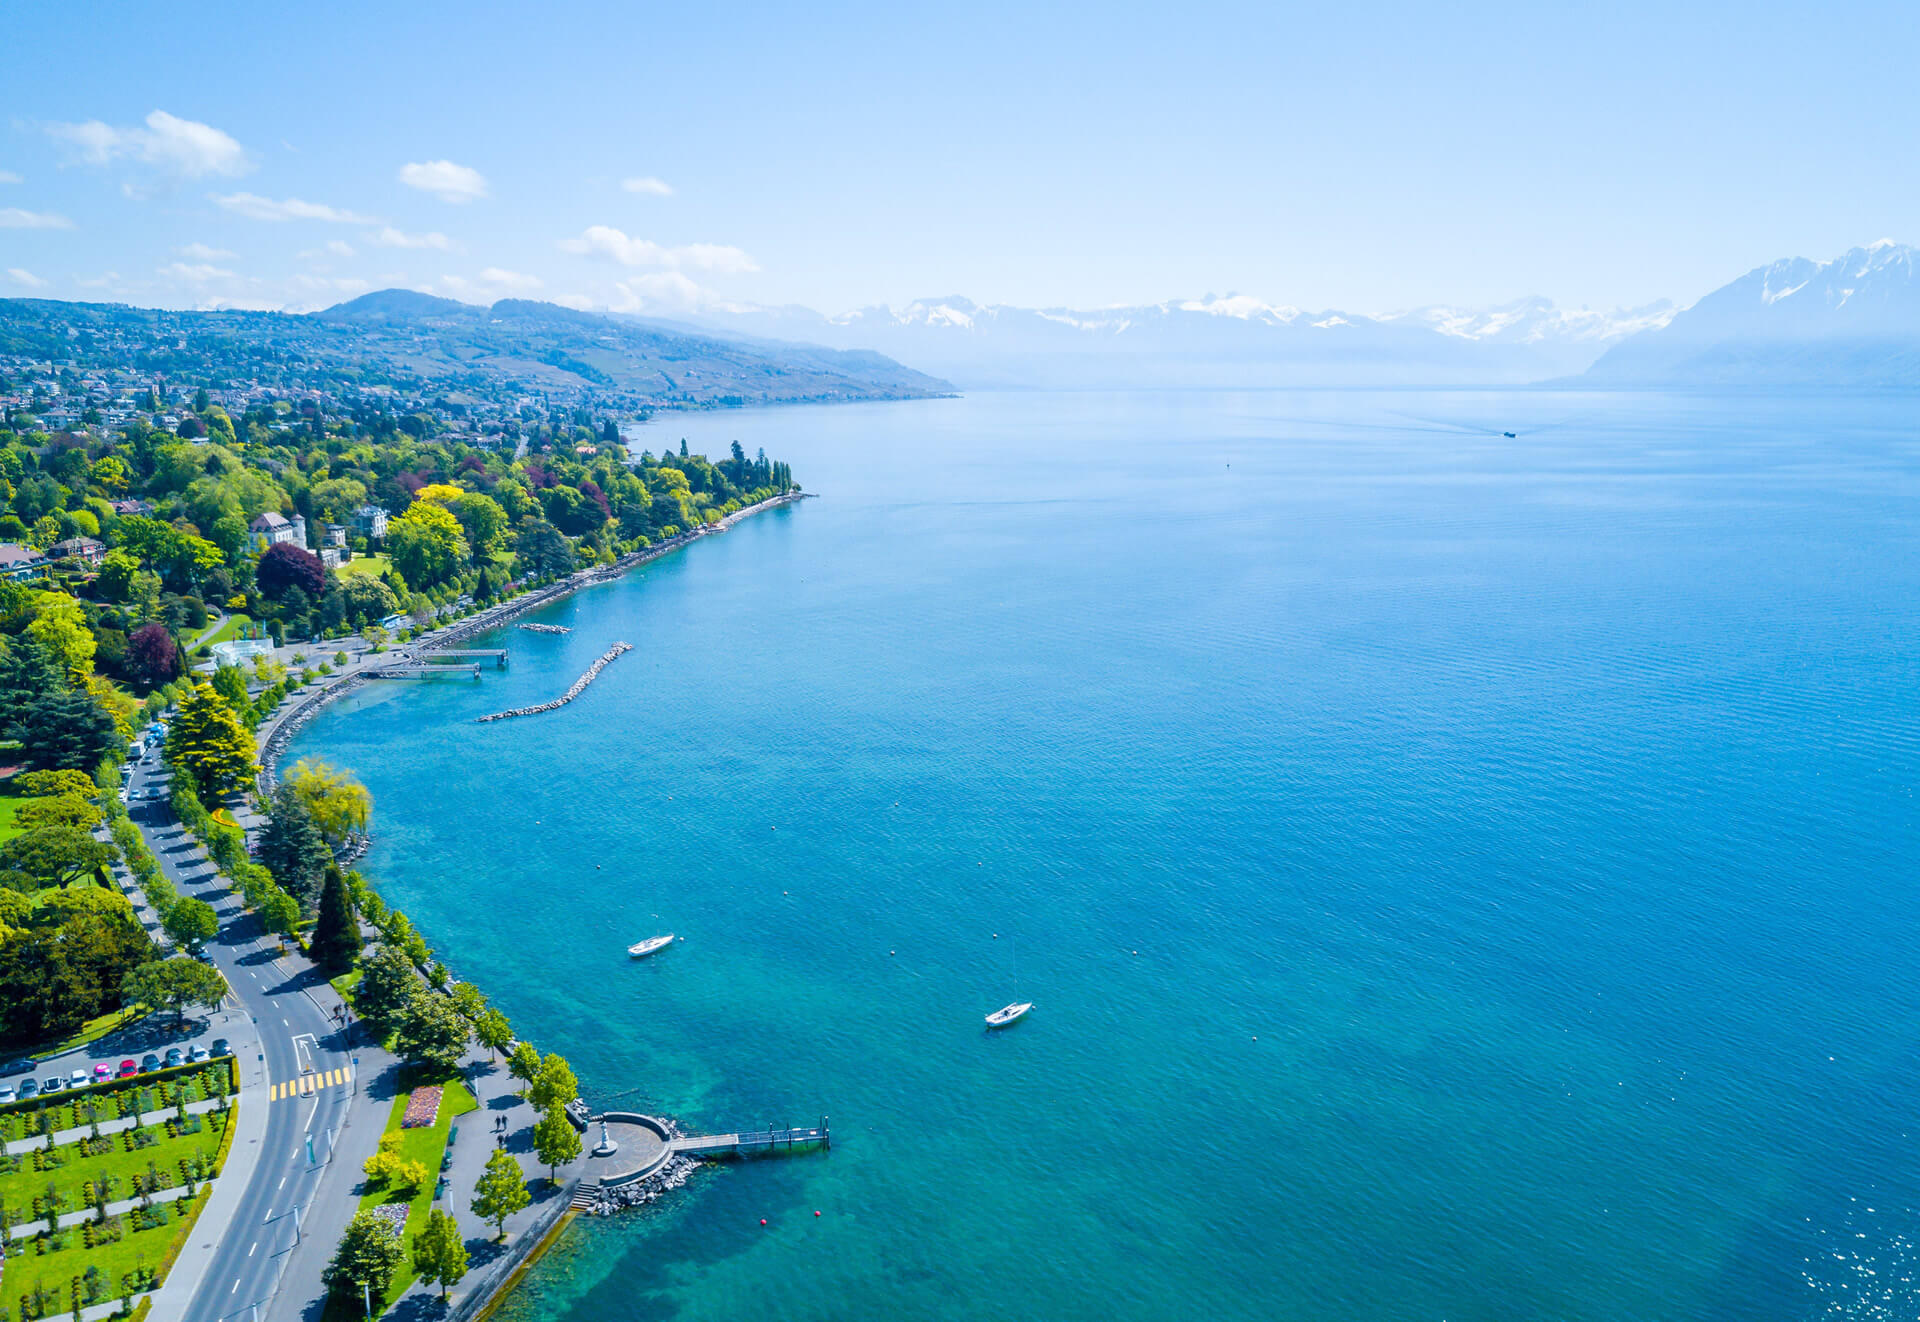 Amazing Aerial Panorama of Ouchy Waterfront in Lausanne